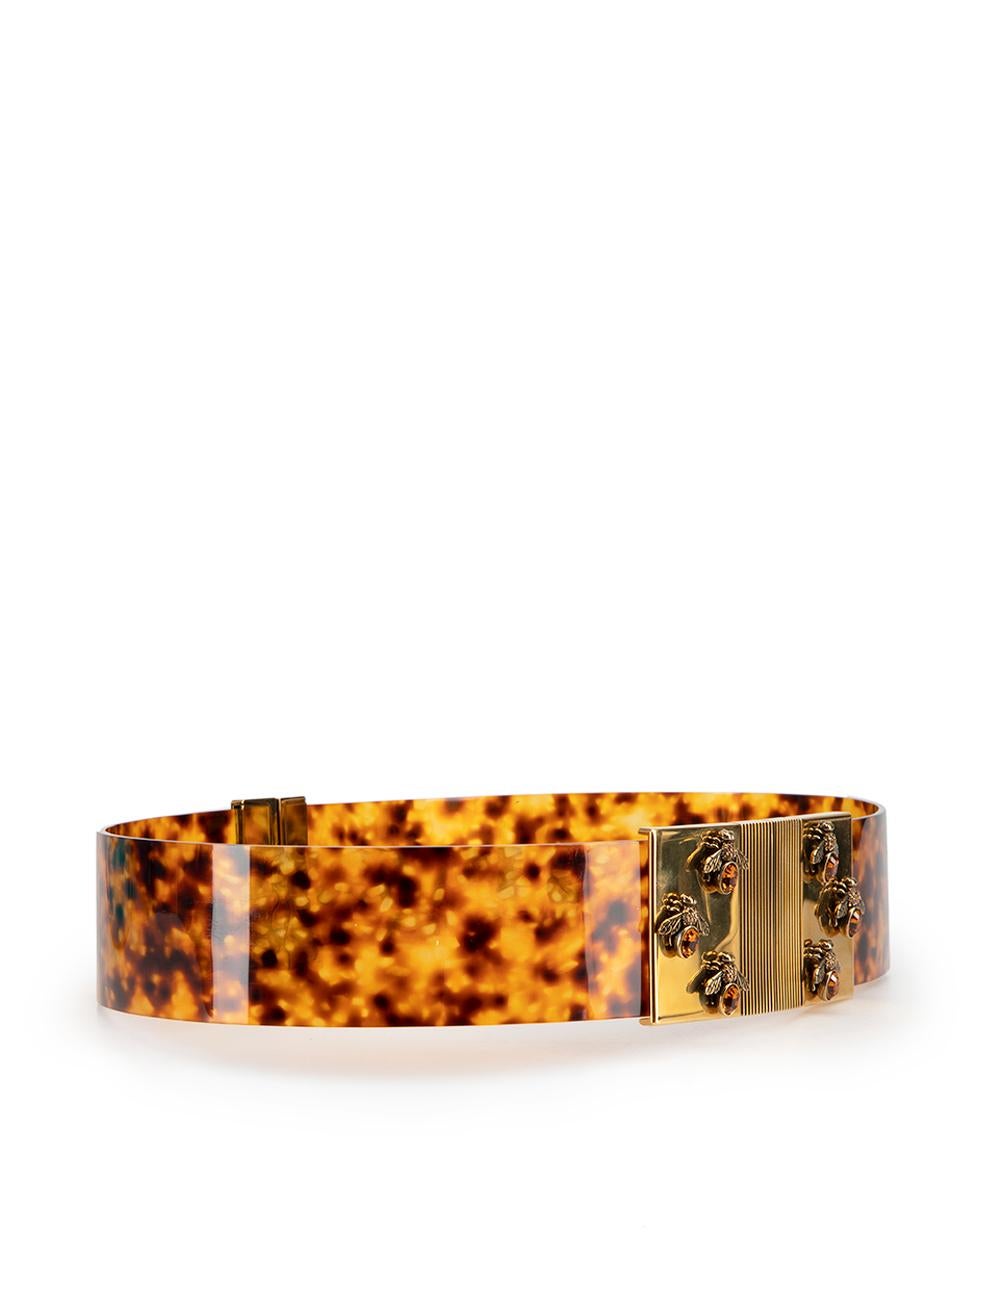 CONDITION is Very good. Minimal wear to belt is evident. Minimal wear to both sides of the perspex with light scratch marks on this used Alexander McQueen designer resale item.
  
Details
Brown
Perspex
Belt
Tortoiseshell pattern
Metal gold tone